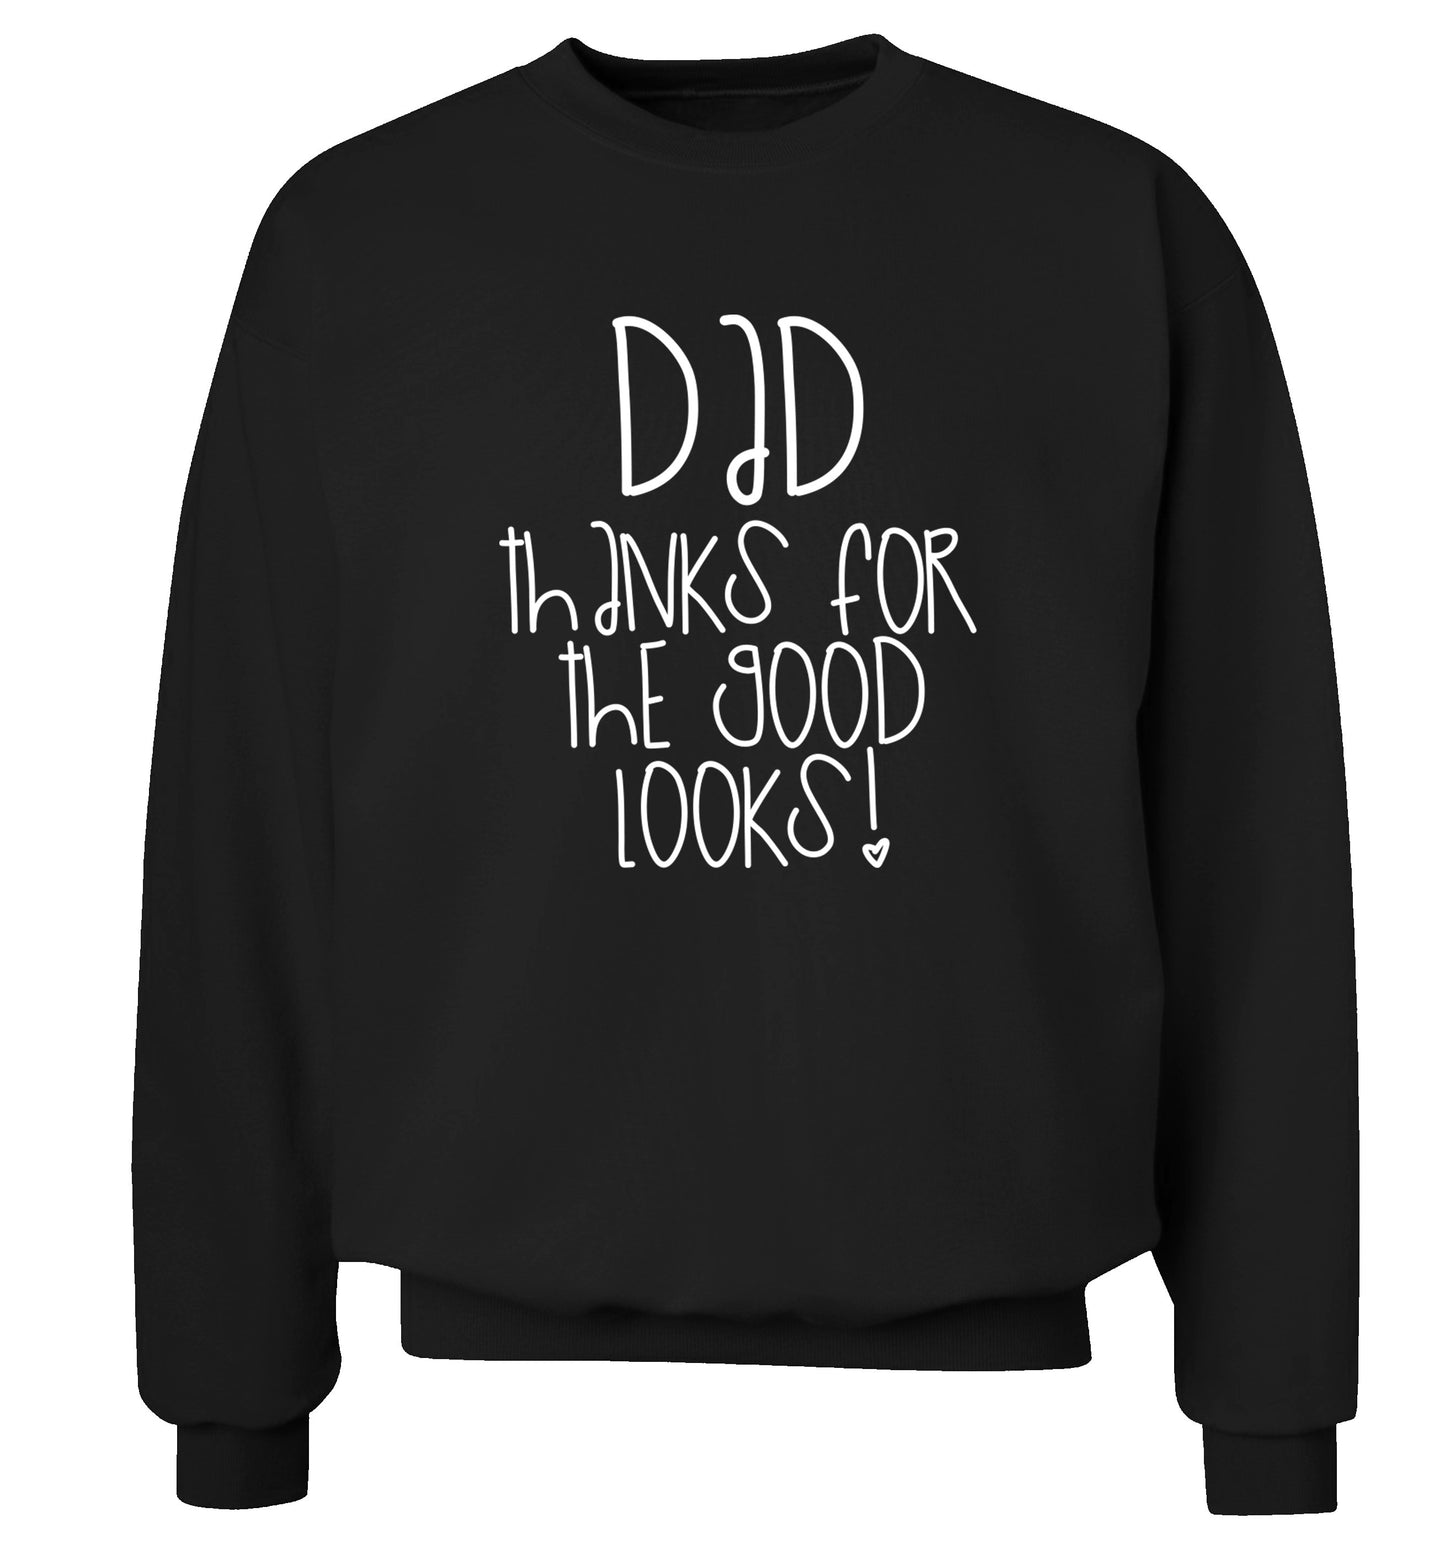 Dad thanks for the good looks Adult's unisex black Sweater 2XL